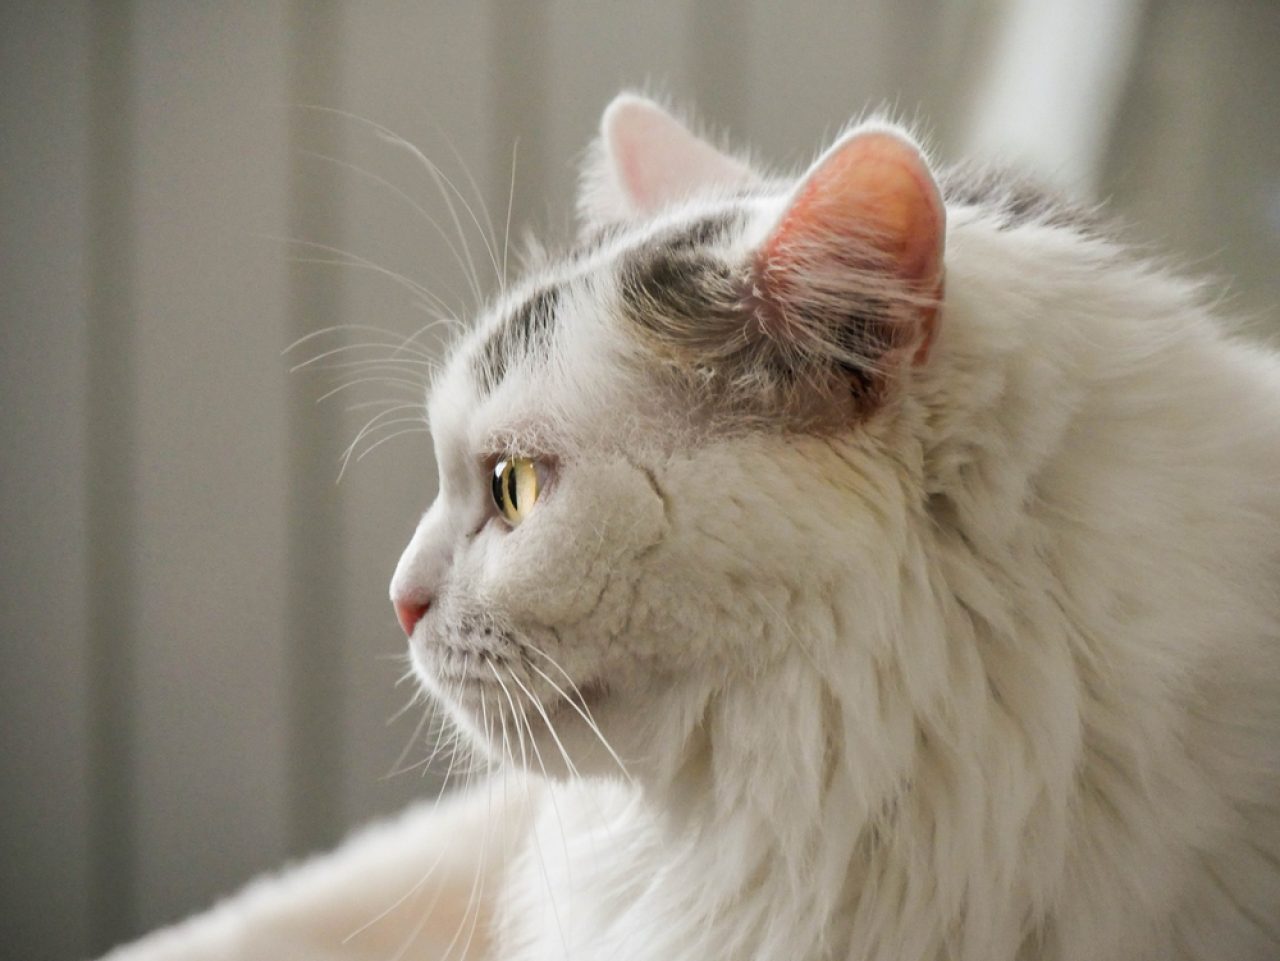 Maine Coon Ragdoll Mix: What's There To Know?